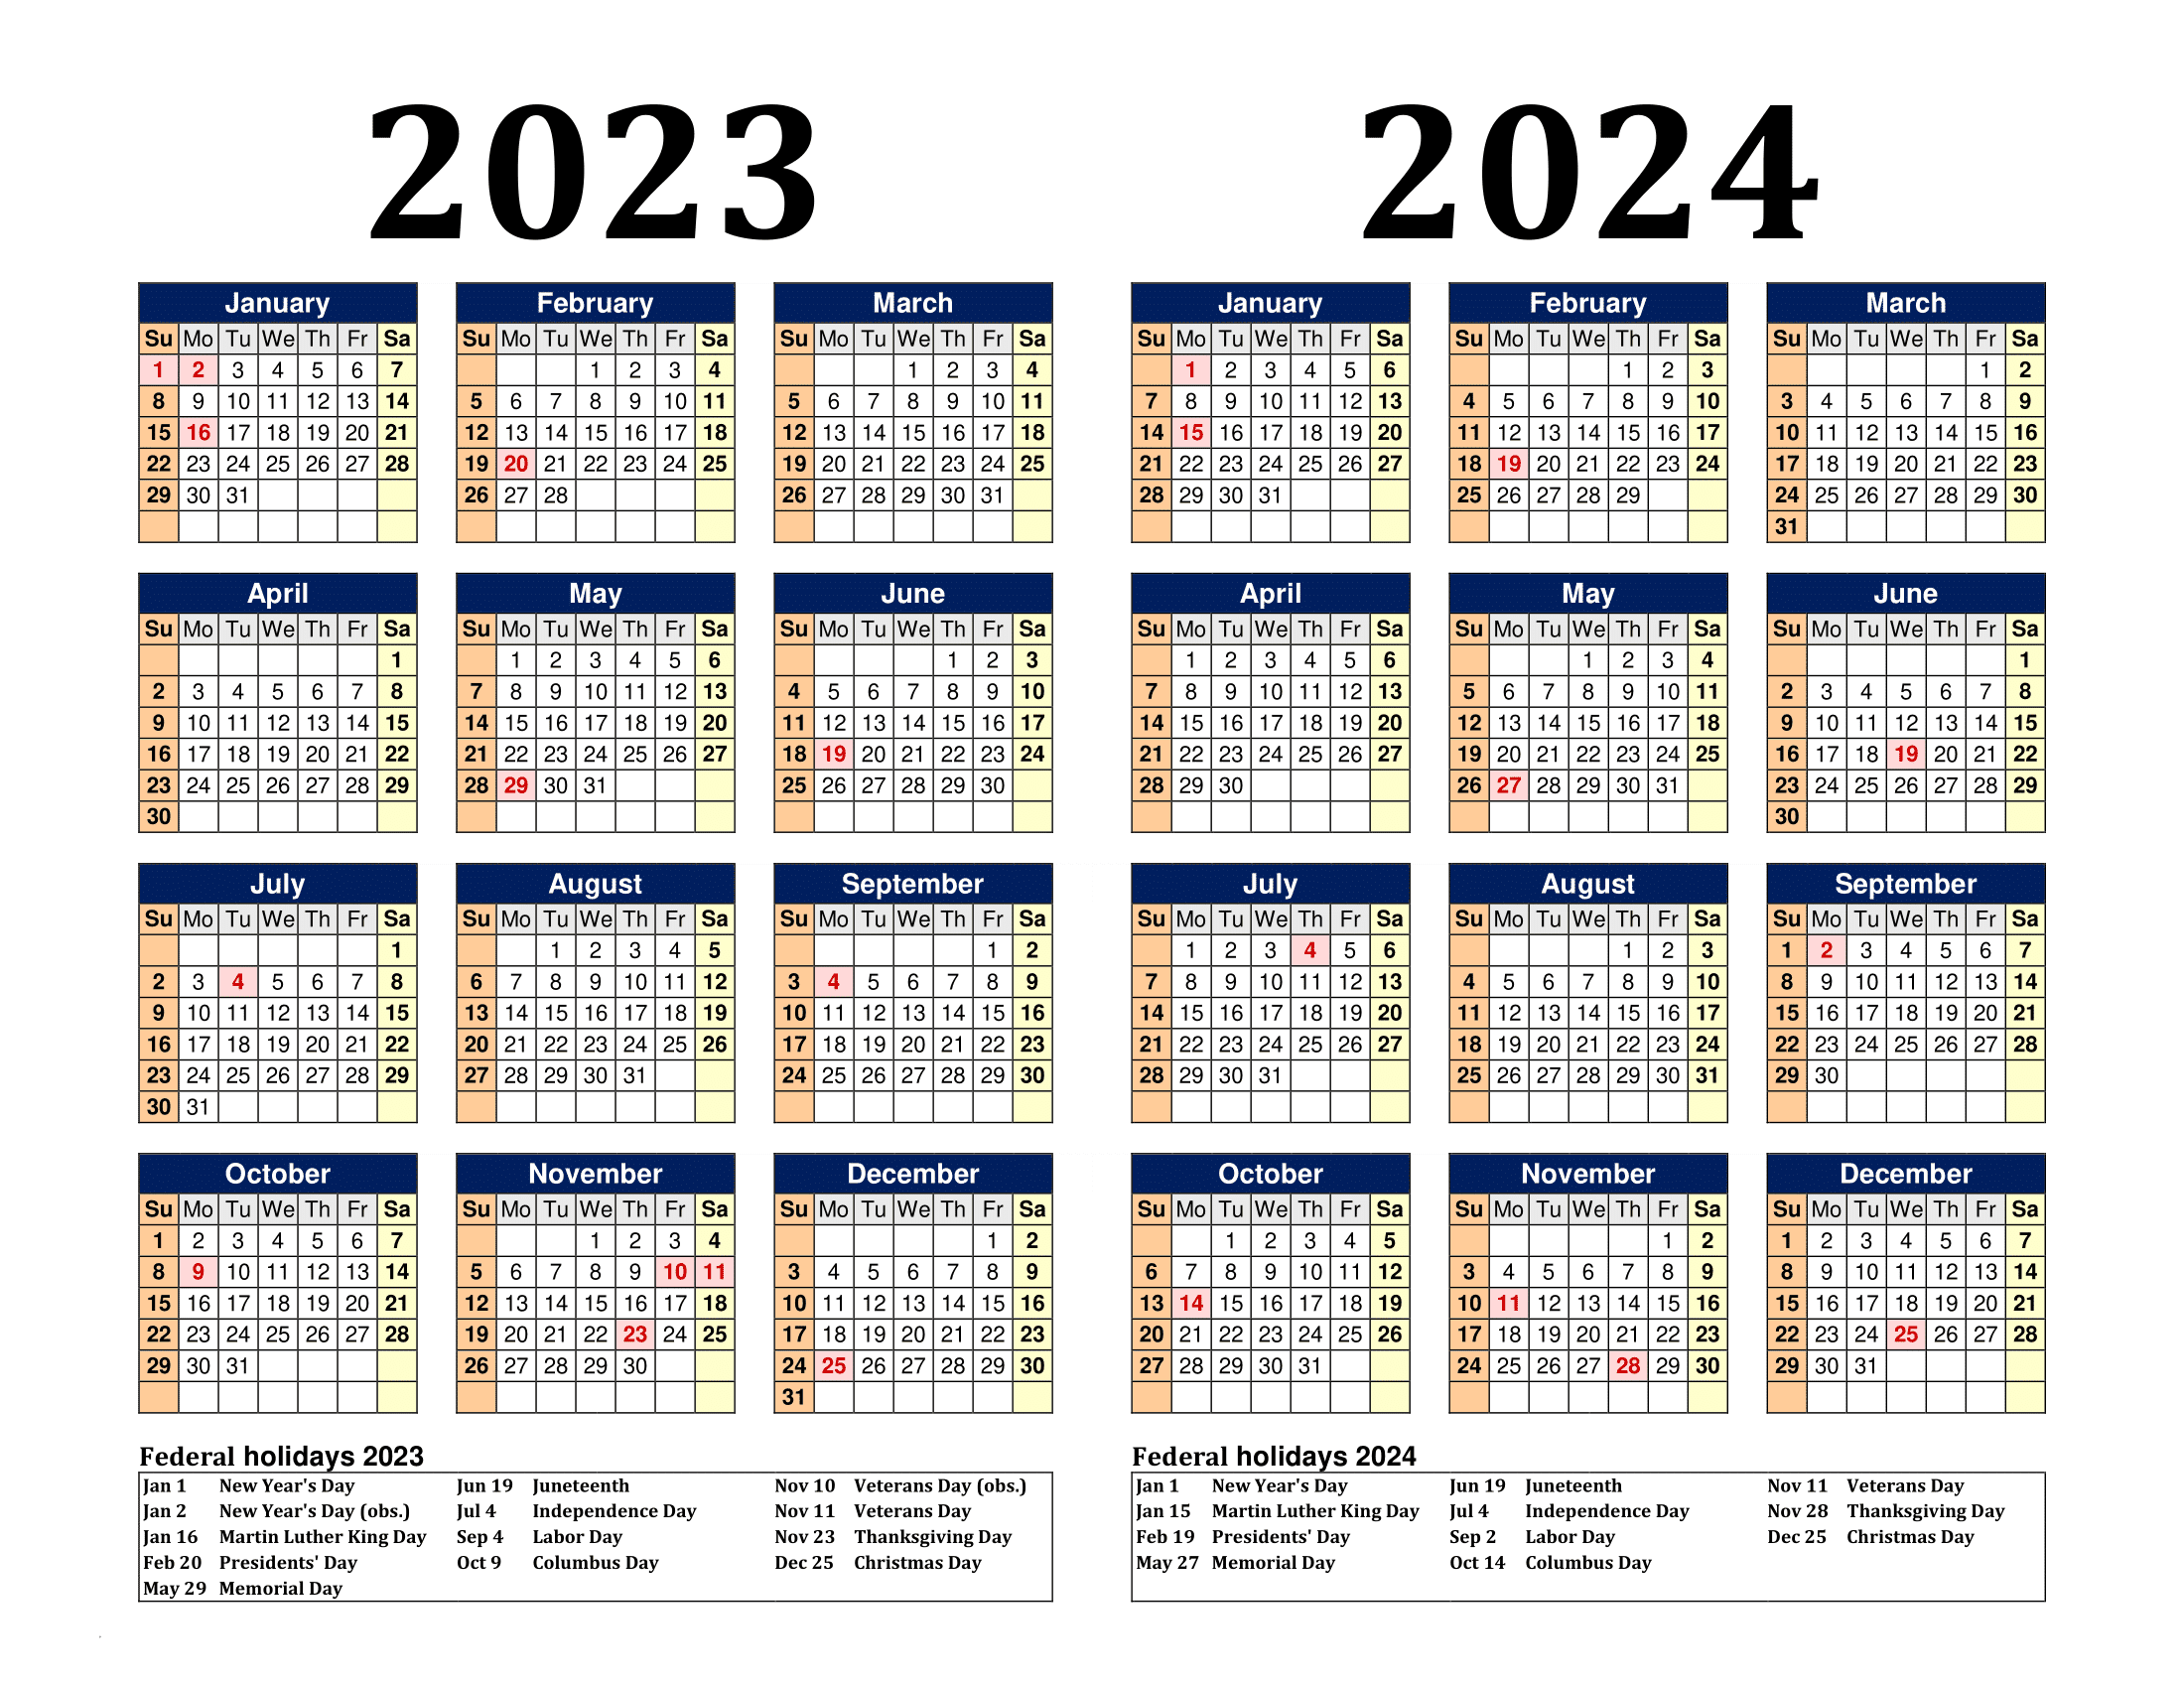 Free Printable Two Year Calendar Templates For 2023 And 2024 In Pdf for Free Printable Monthly Calendar 2023 And 2024